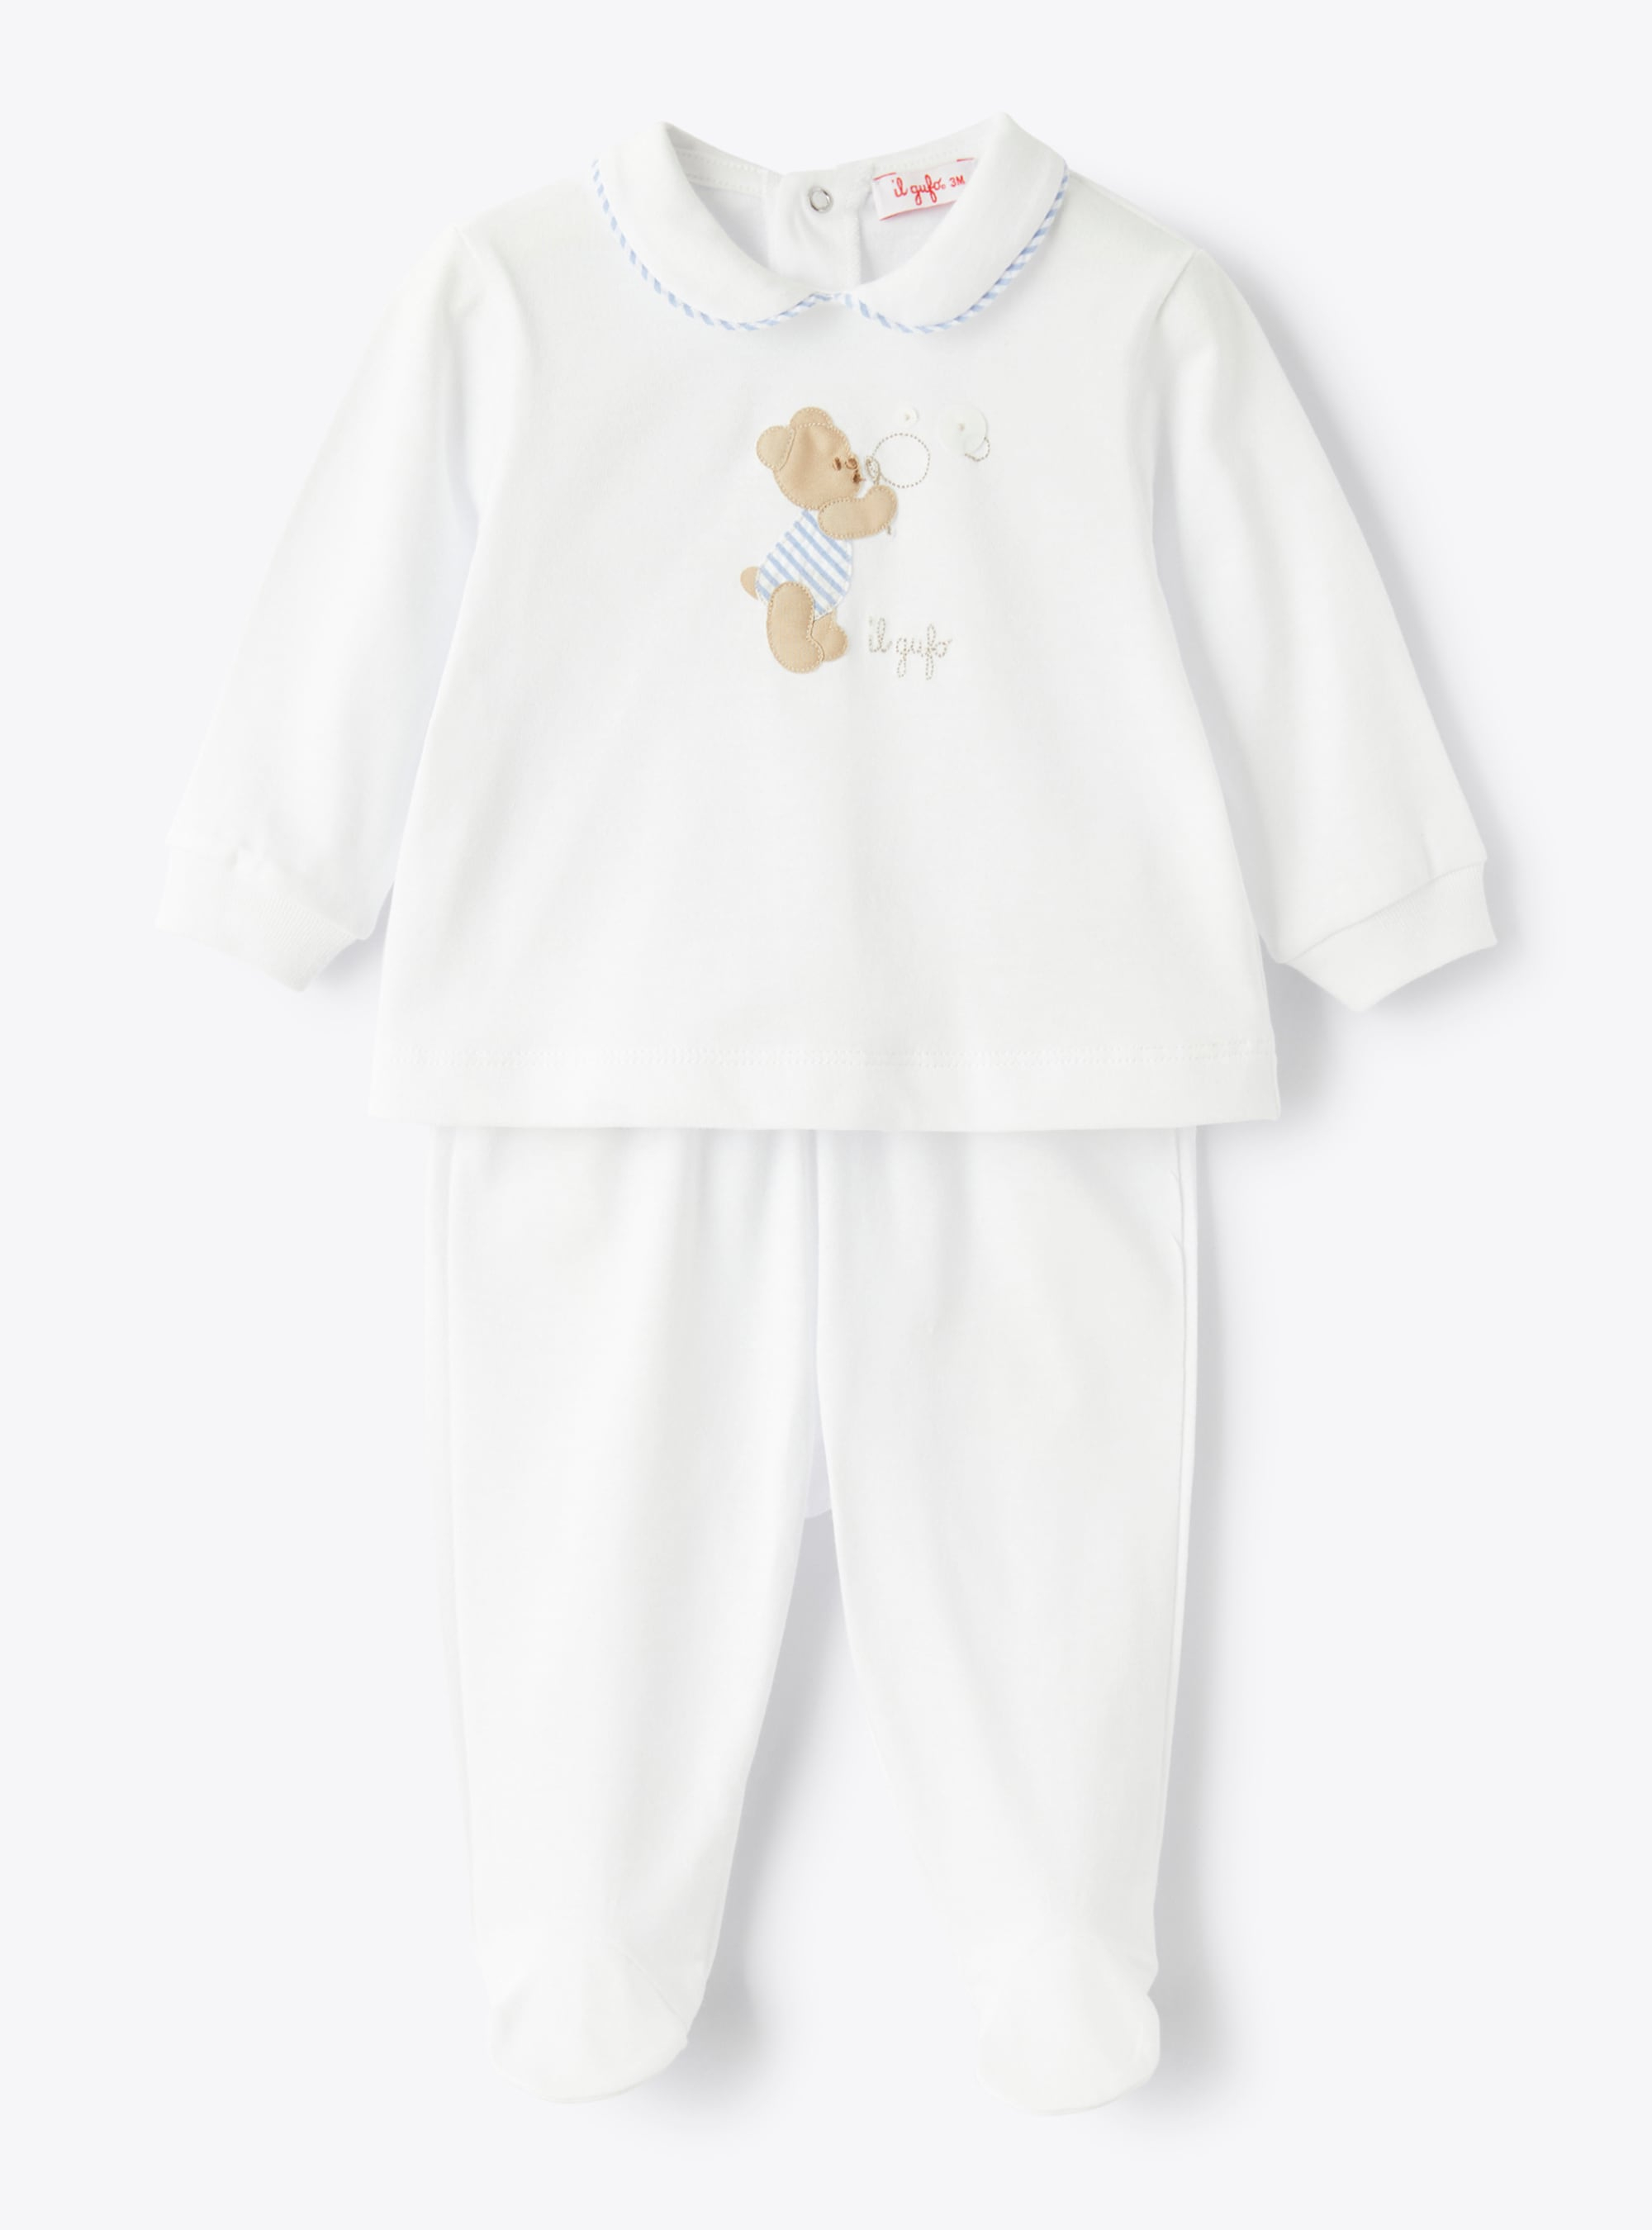 Two-piece babysuit for baby boys with teddy-bear detail - COMPLETO DUE PEZZI - Il Gufo